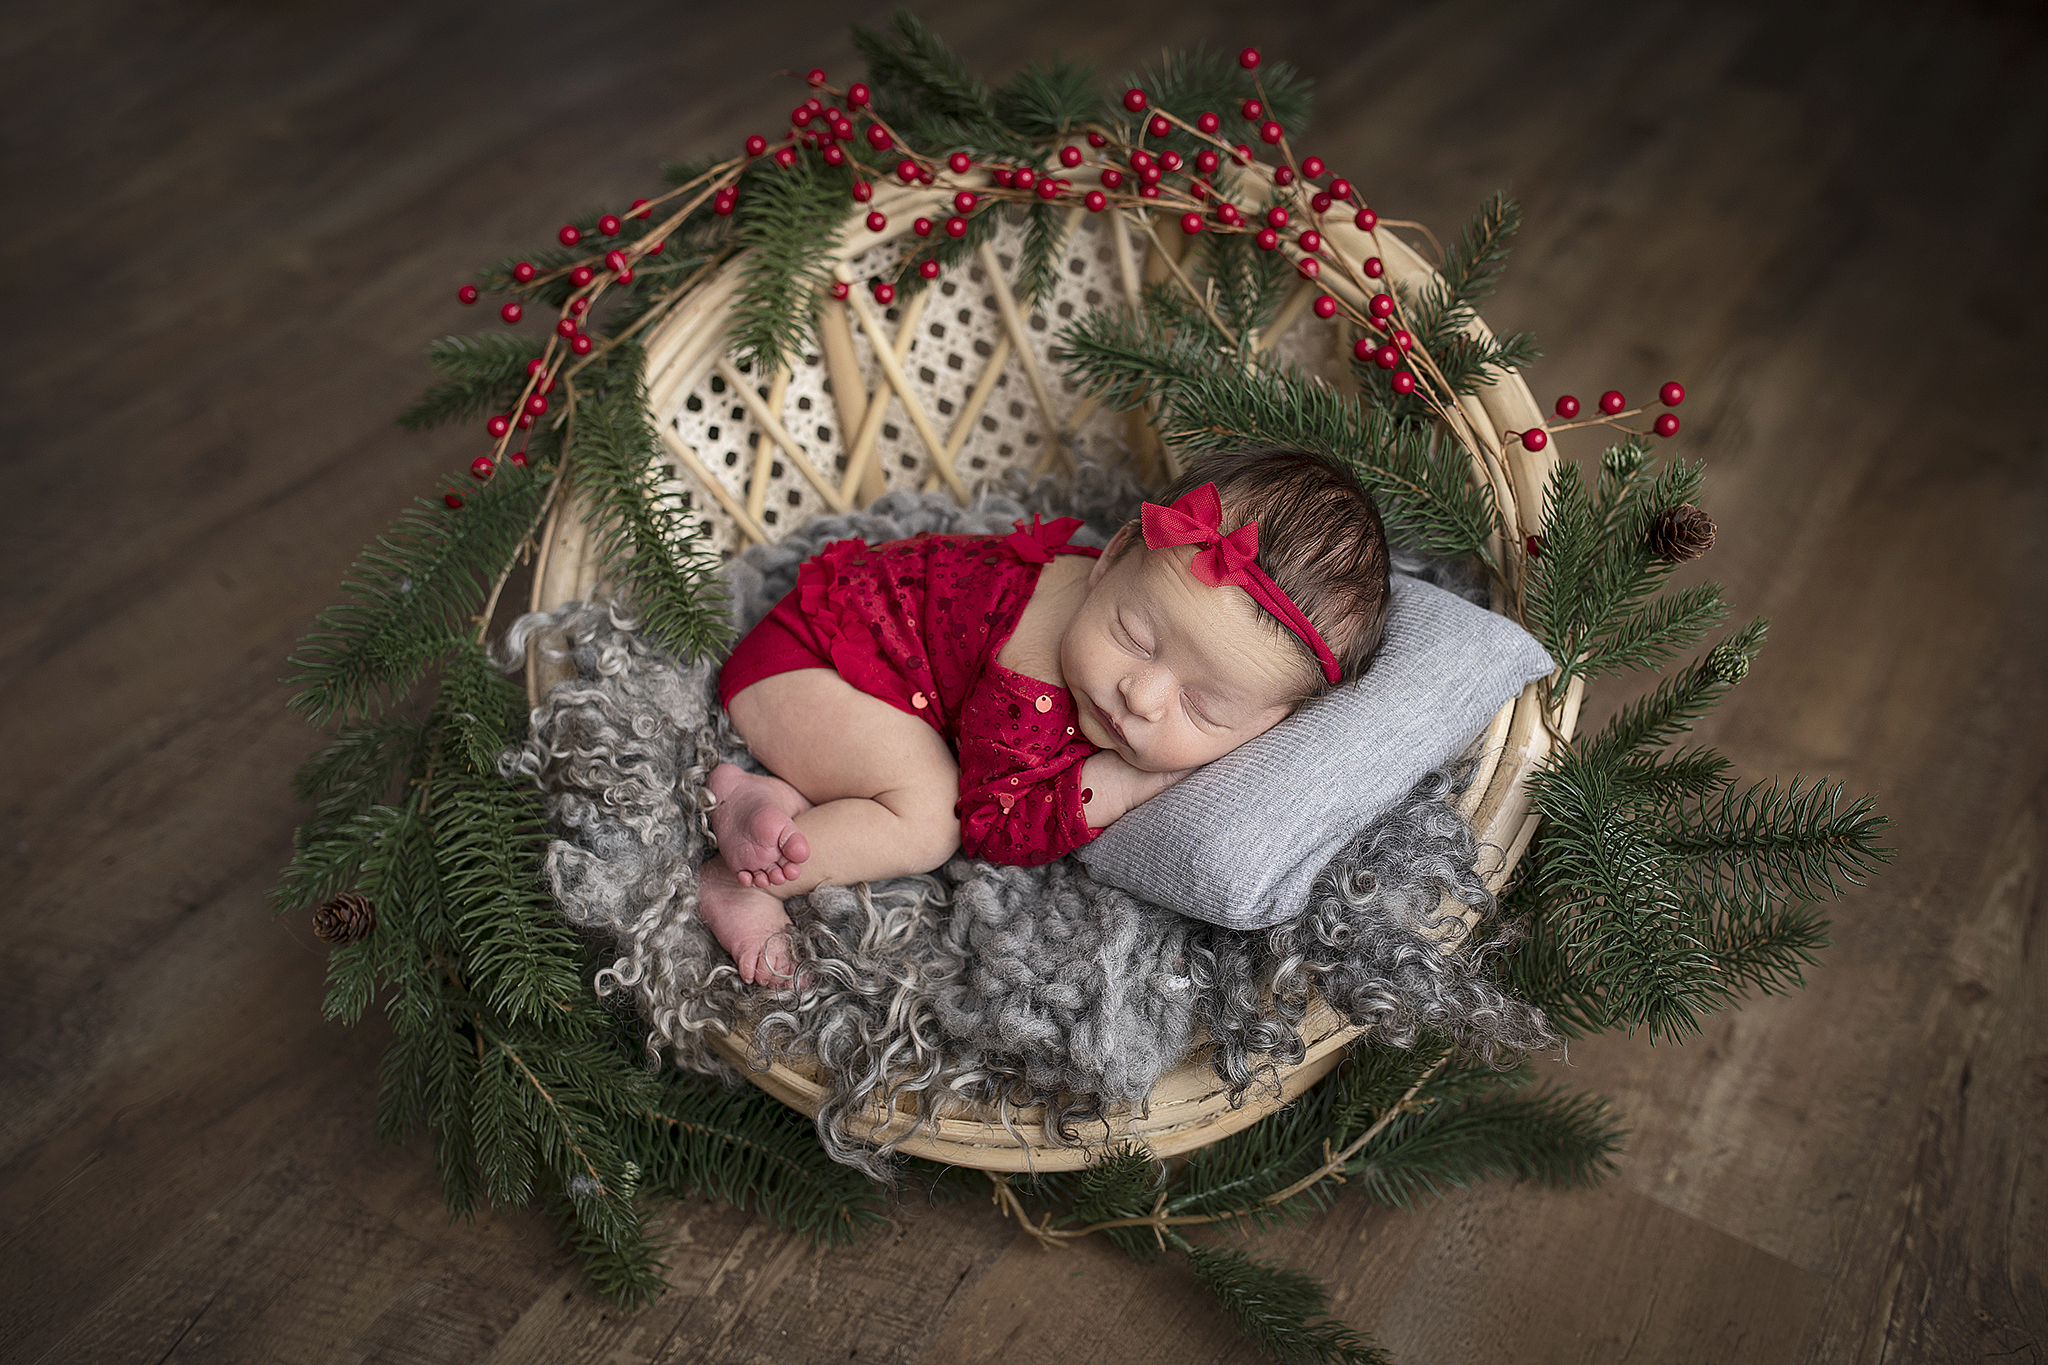 Newborn baby photo from newborn session. Baby is wearing red outfit and laying in a small round chair